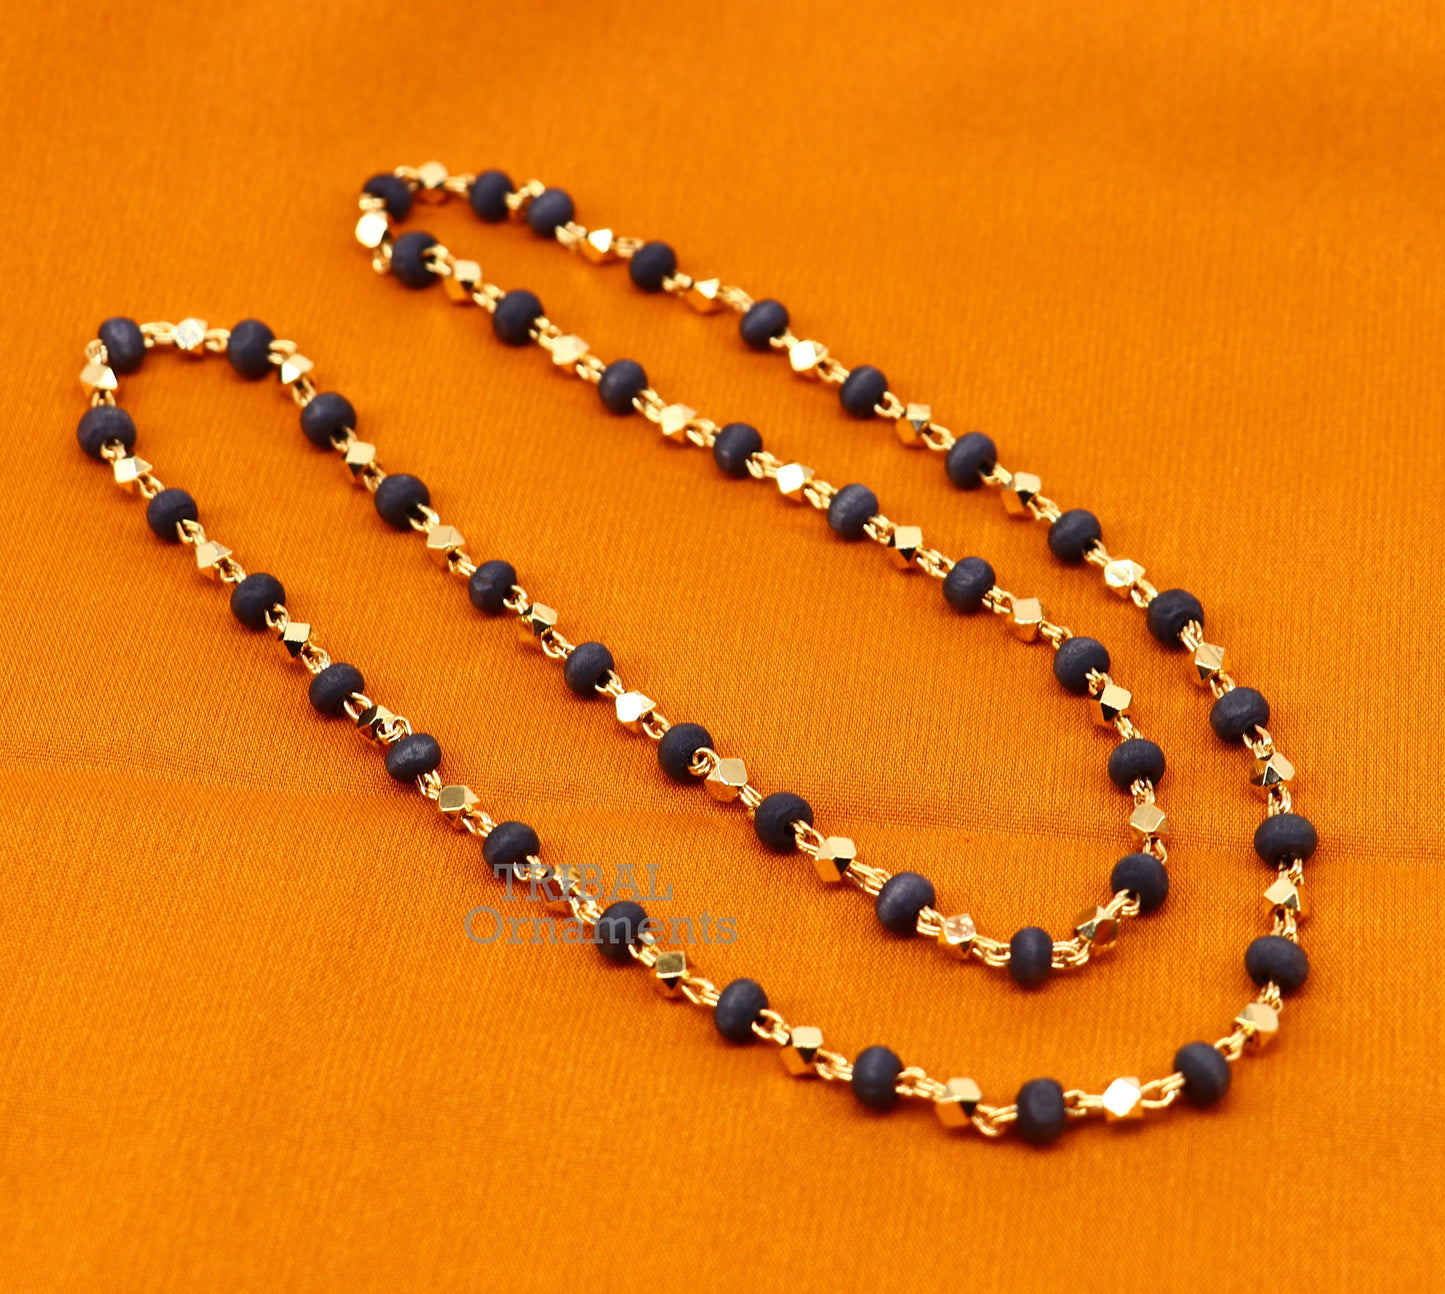 Sterling silver handmade wooden beads basil rosary beads silver chain over gold polished, black tulsi mala customized necklace ch161 - TRIBAL ORNAMENTS